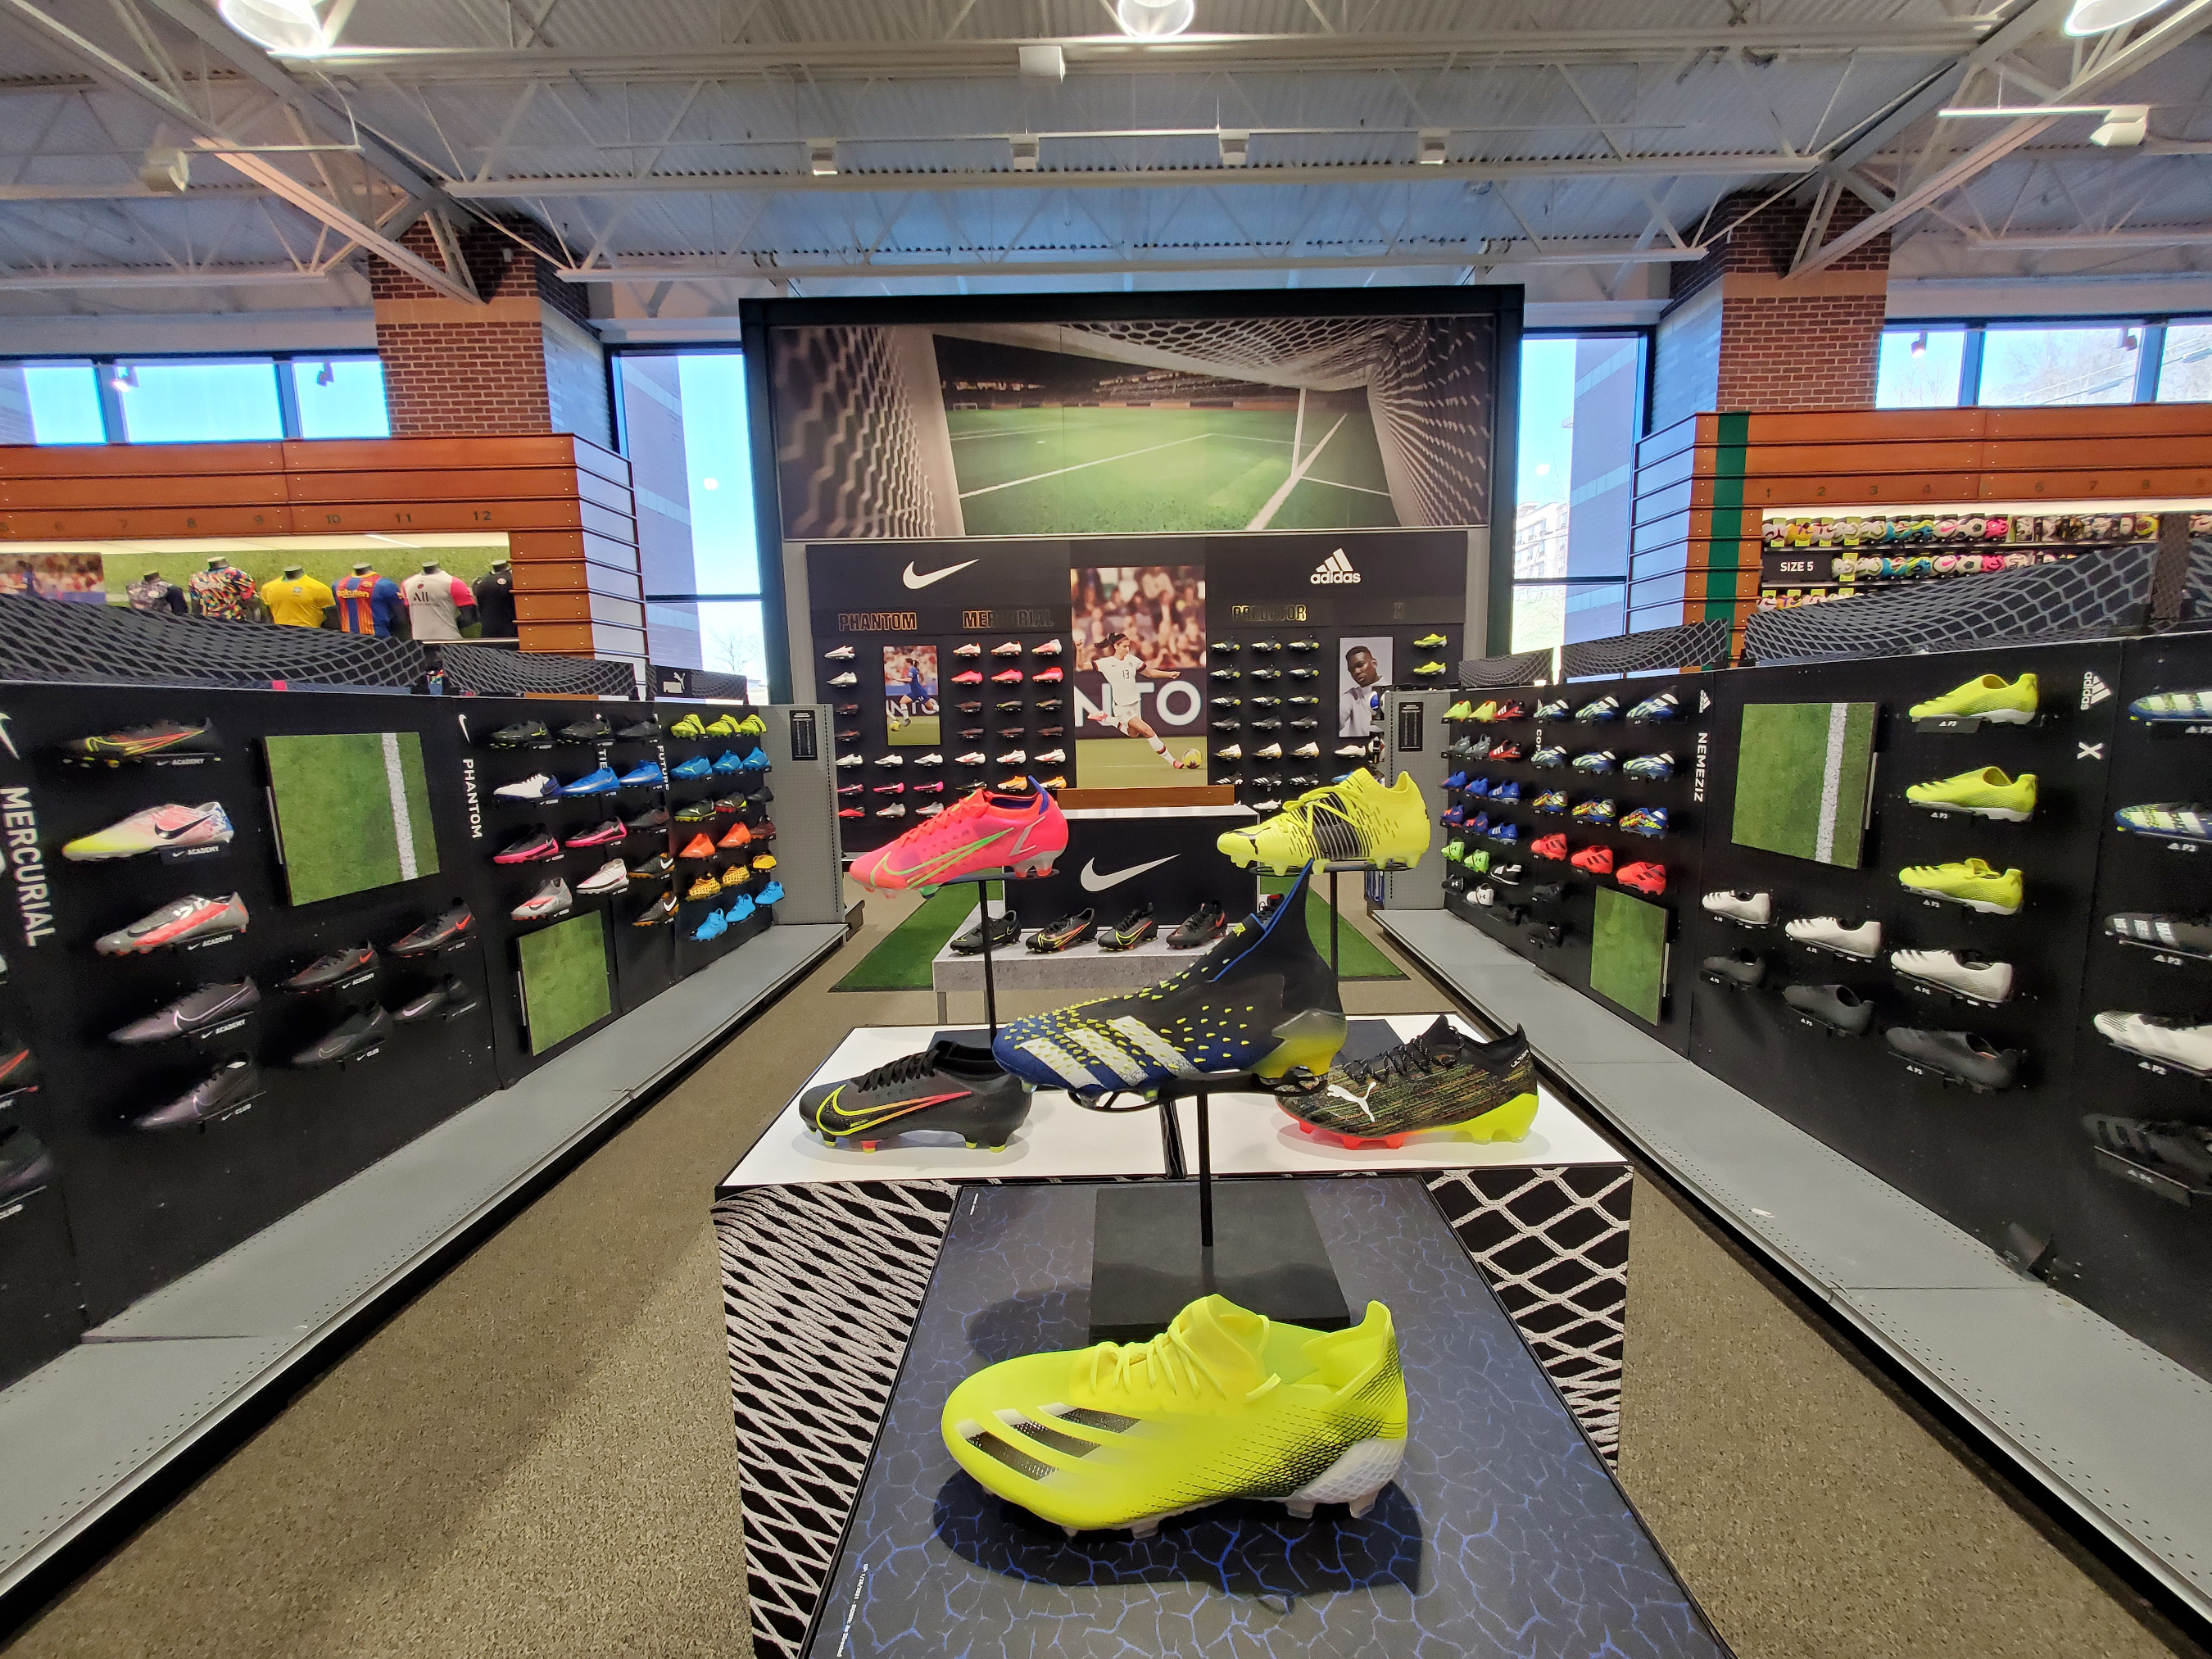 DICK'S Sporting Goods Announces Grand Opening of New Concept Store 'DICK’S House of Sport' And Expands Offerings in Select Golf Galaxy Locations Nationwide - DICK’S Soccer Shops